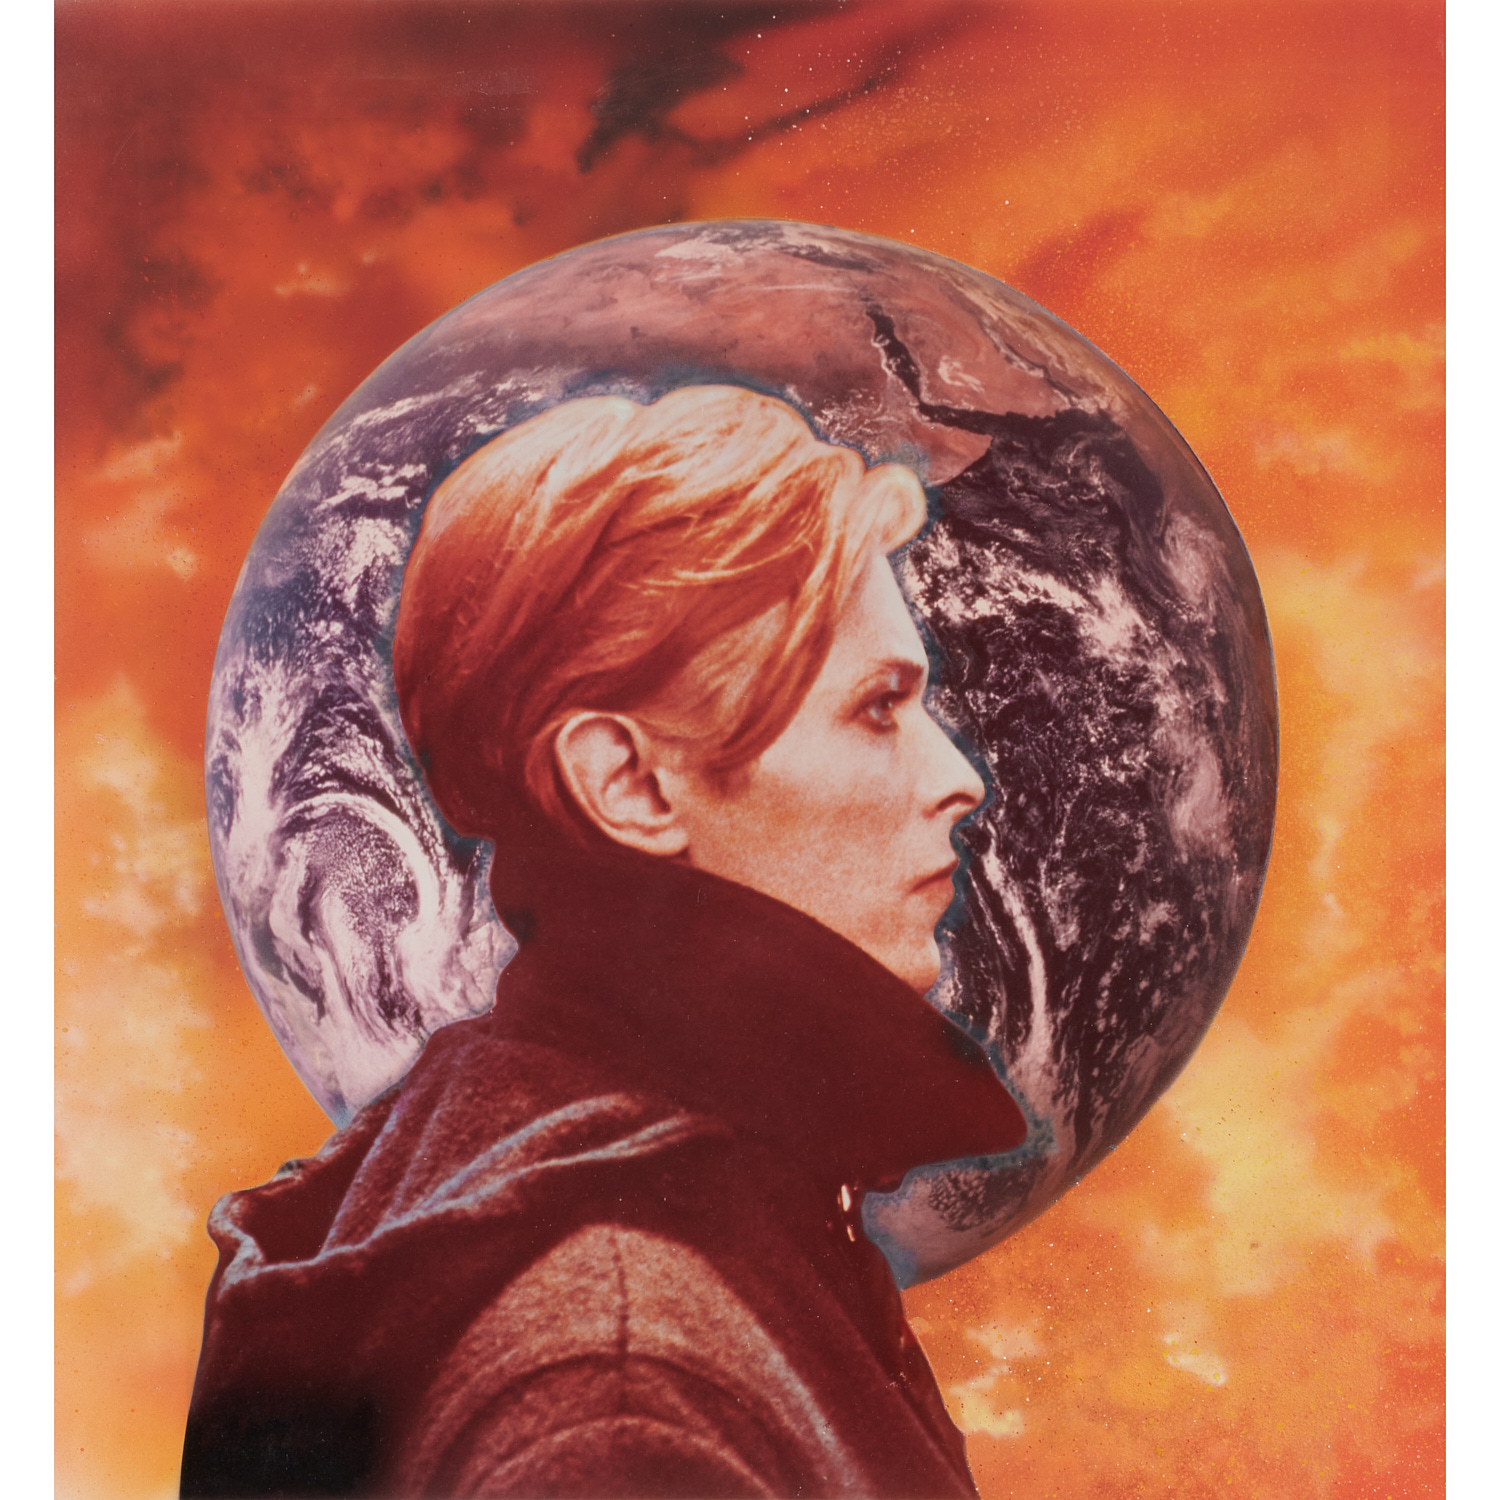 DAVID BOWIE MAN WHO FELL TO EARTH  362150